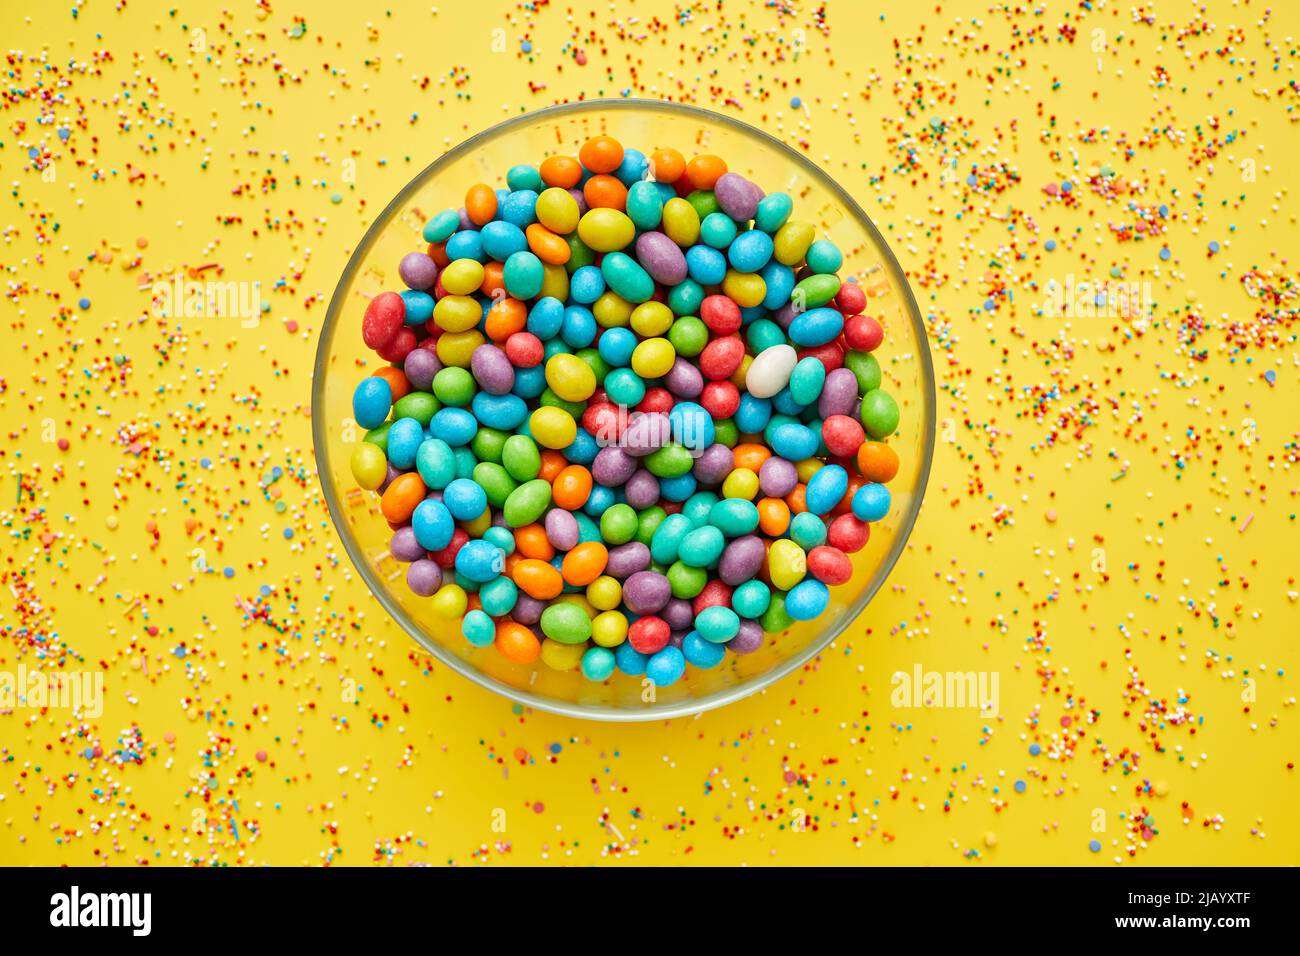 Glassy bowl full of colorful sweet beans on yellow background with splattering sprinkles Stock Photo